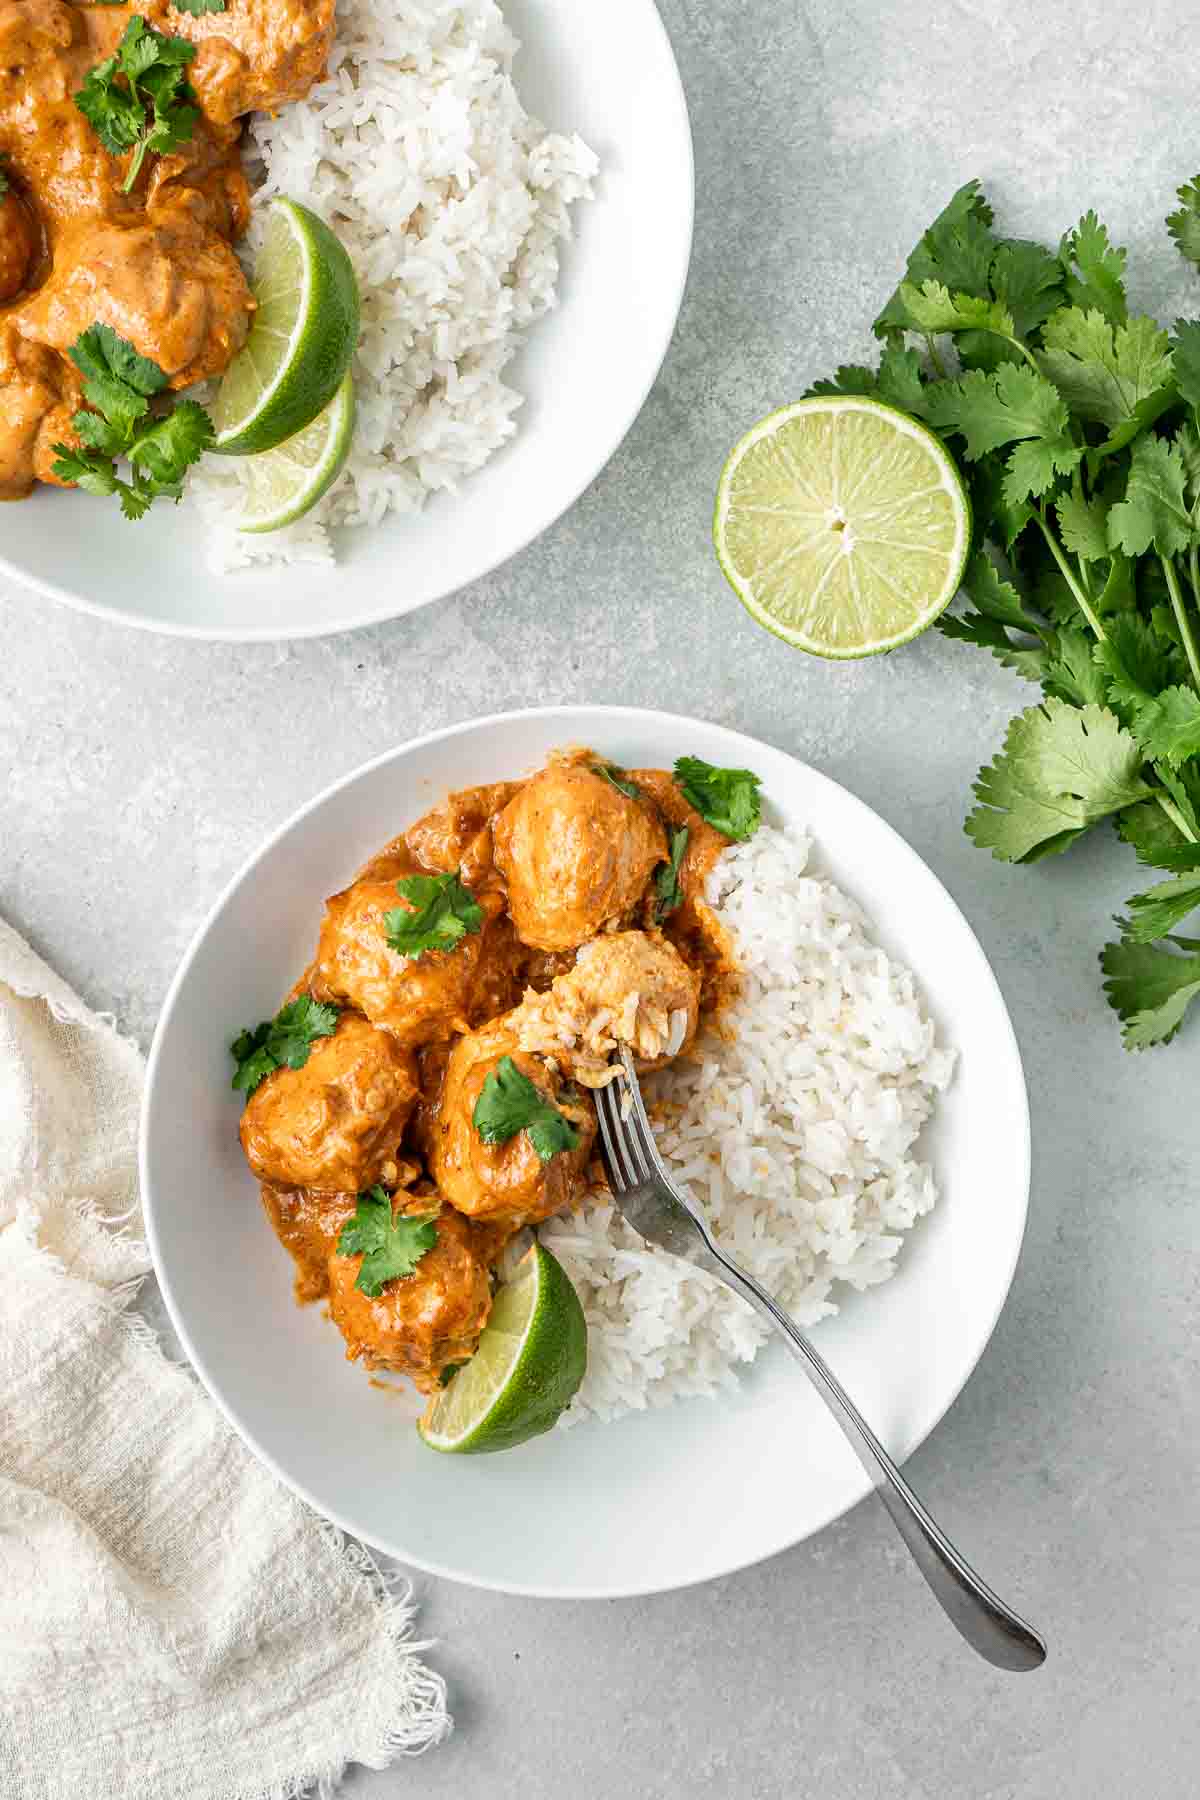 Thai red curry with baked chicken meatballs served on a white plate with rice and a fork taking a bite.